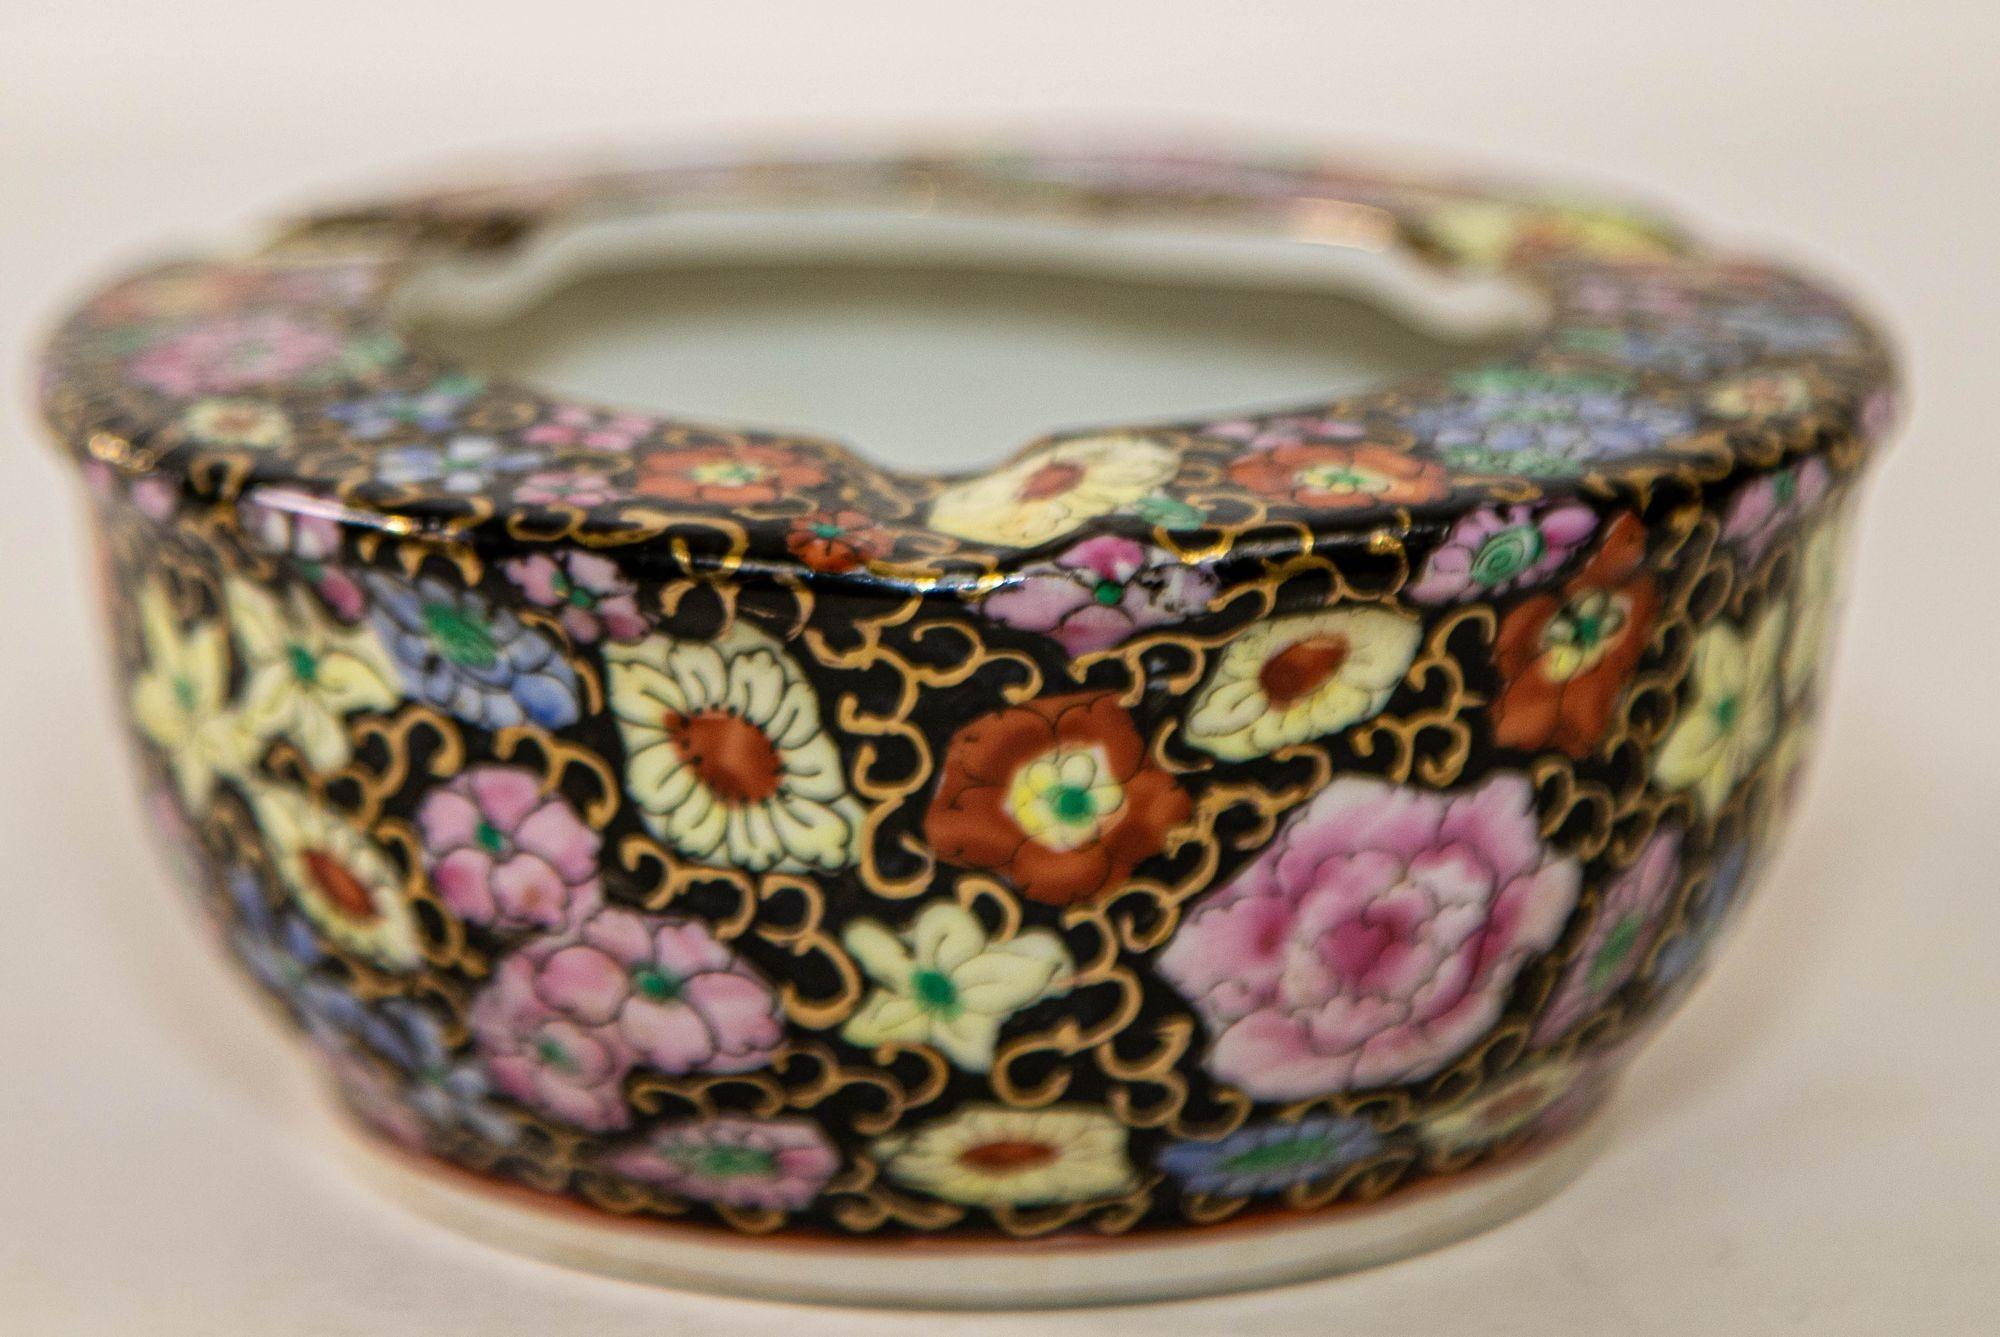 Vintage Asian porcelain hand painted floral ashtray hand made in China.
This gorgeous gilded ashtray is intricately hand-painted with Asian floral lotus decoration in gilt and geometric design on black background in blue red green and gold jeweled